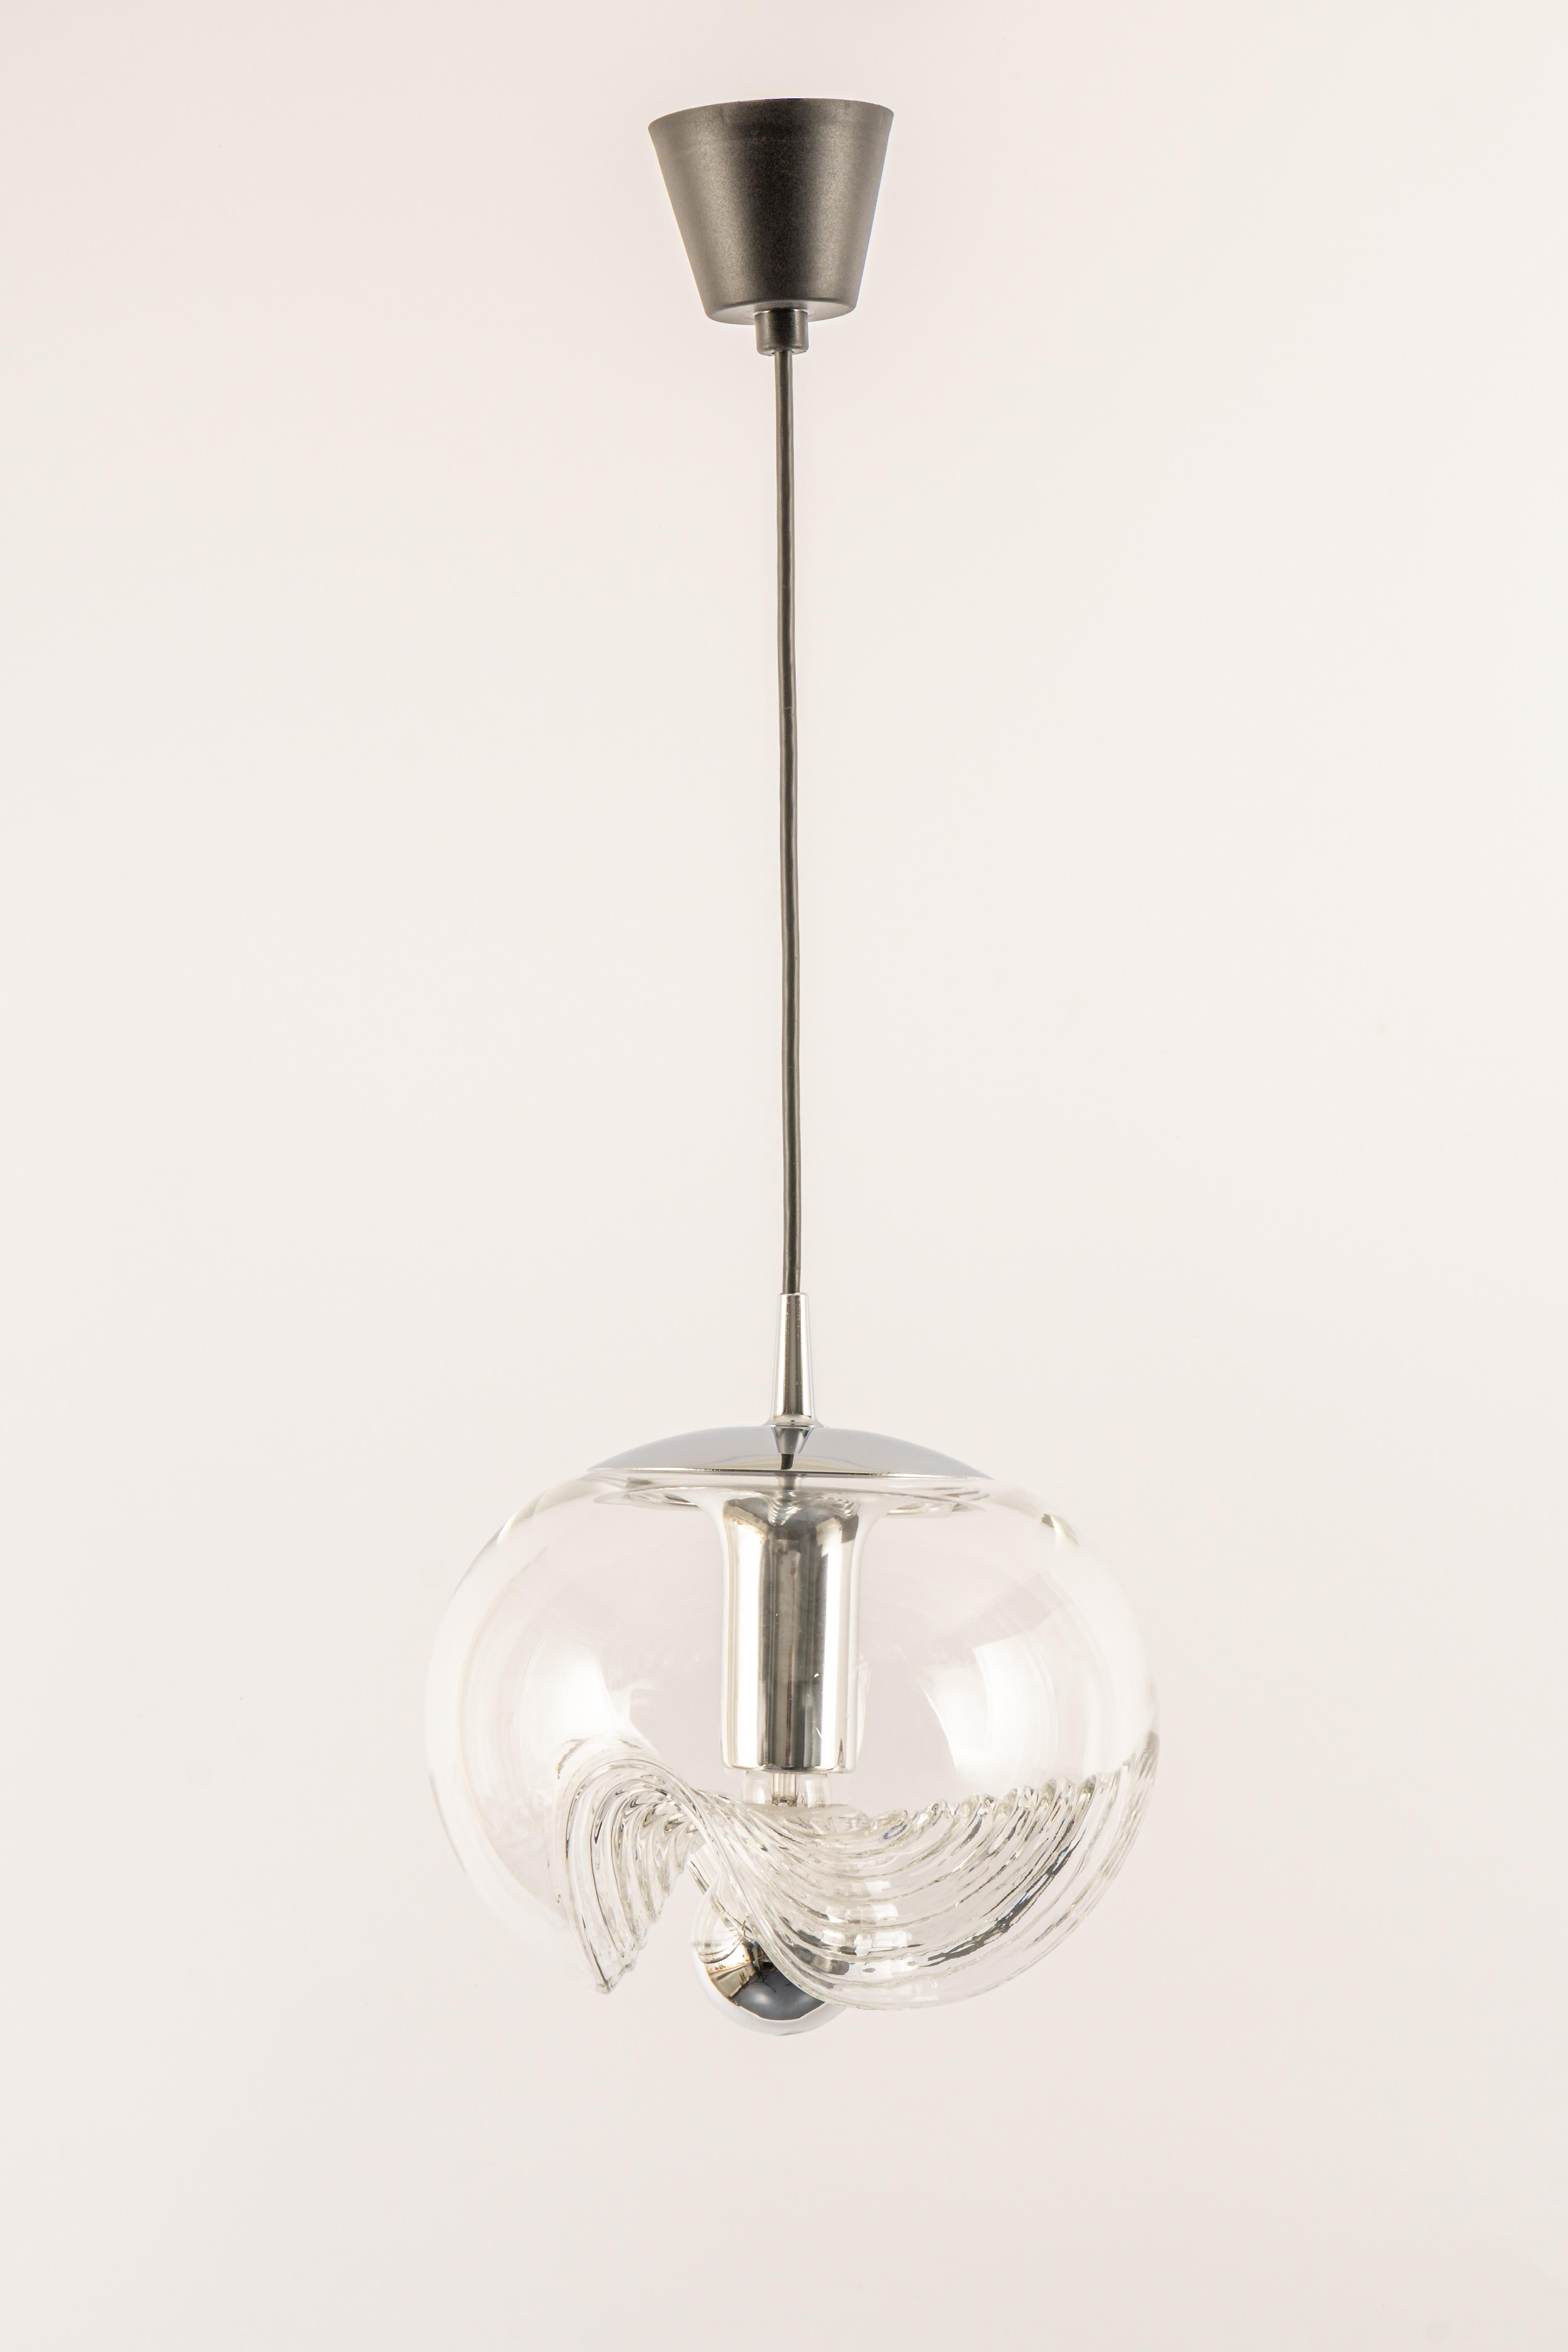 A special round Biomorphic clear glass pendant designed by Koch & Lowy for Peill & Putzler, manufactured in Germany, circa 1970s.
High quality and in very good condition. Cleaned, well-wired, and ready to use. 
Each fixture requires a 1 x E27